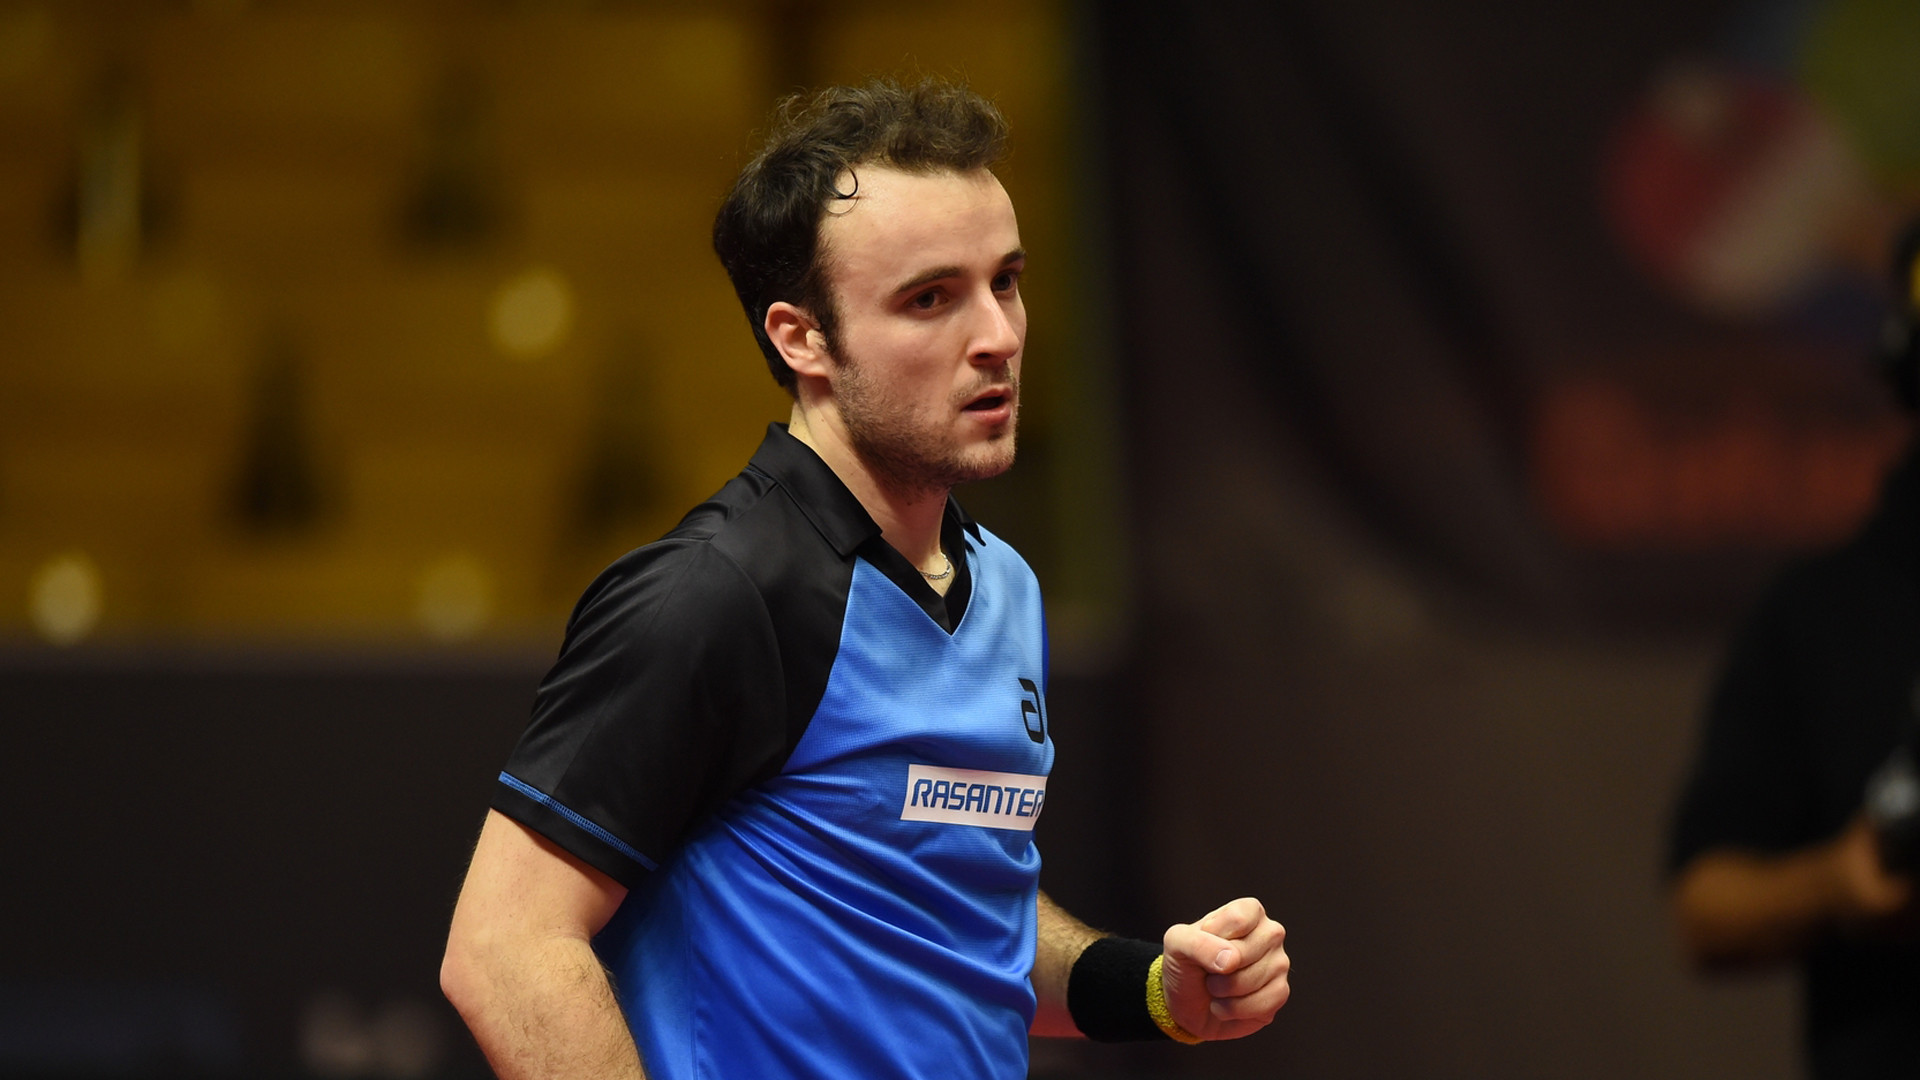 France's Simon Gauzy pushed China's world number one Xu Xin to a seventh game before losing his men's singles quarter-final today at the Qatar Open in Doha ©ITTF